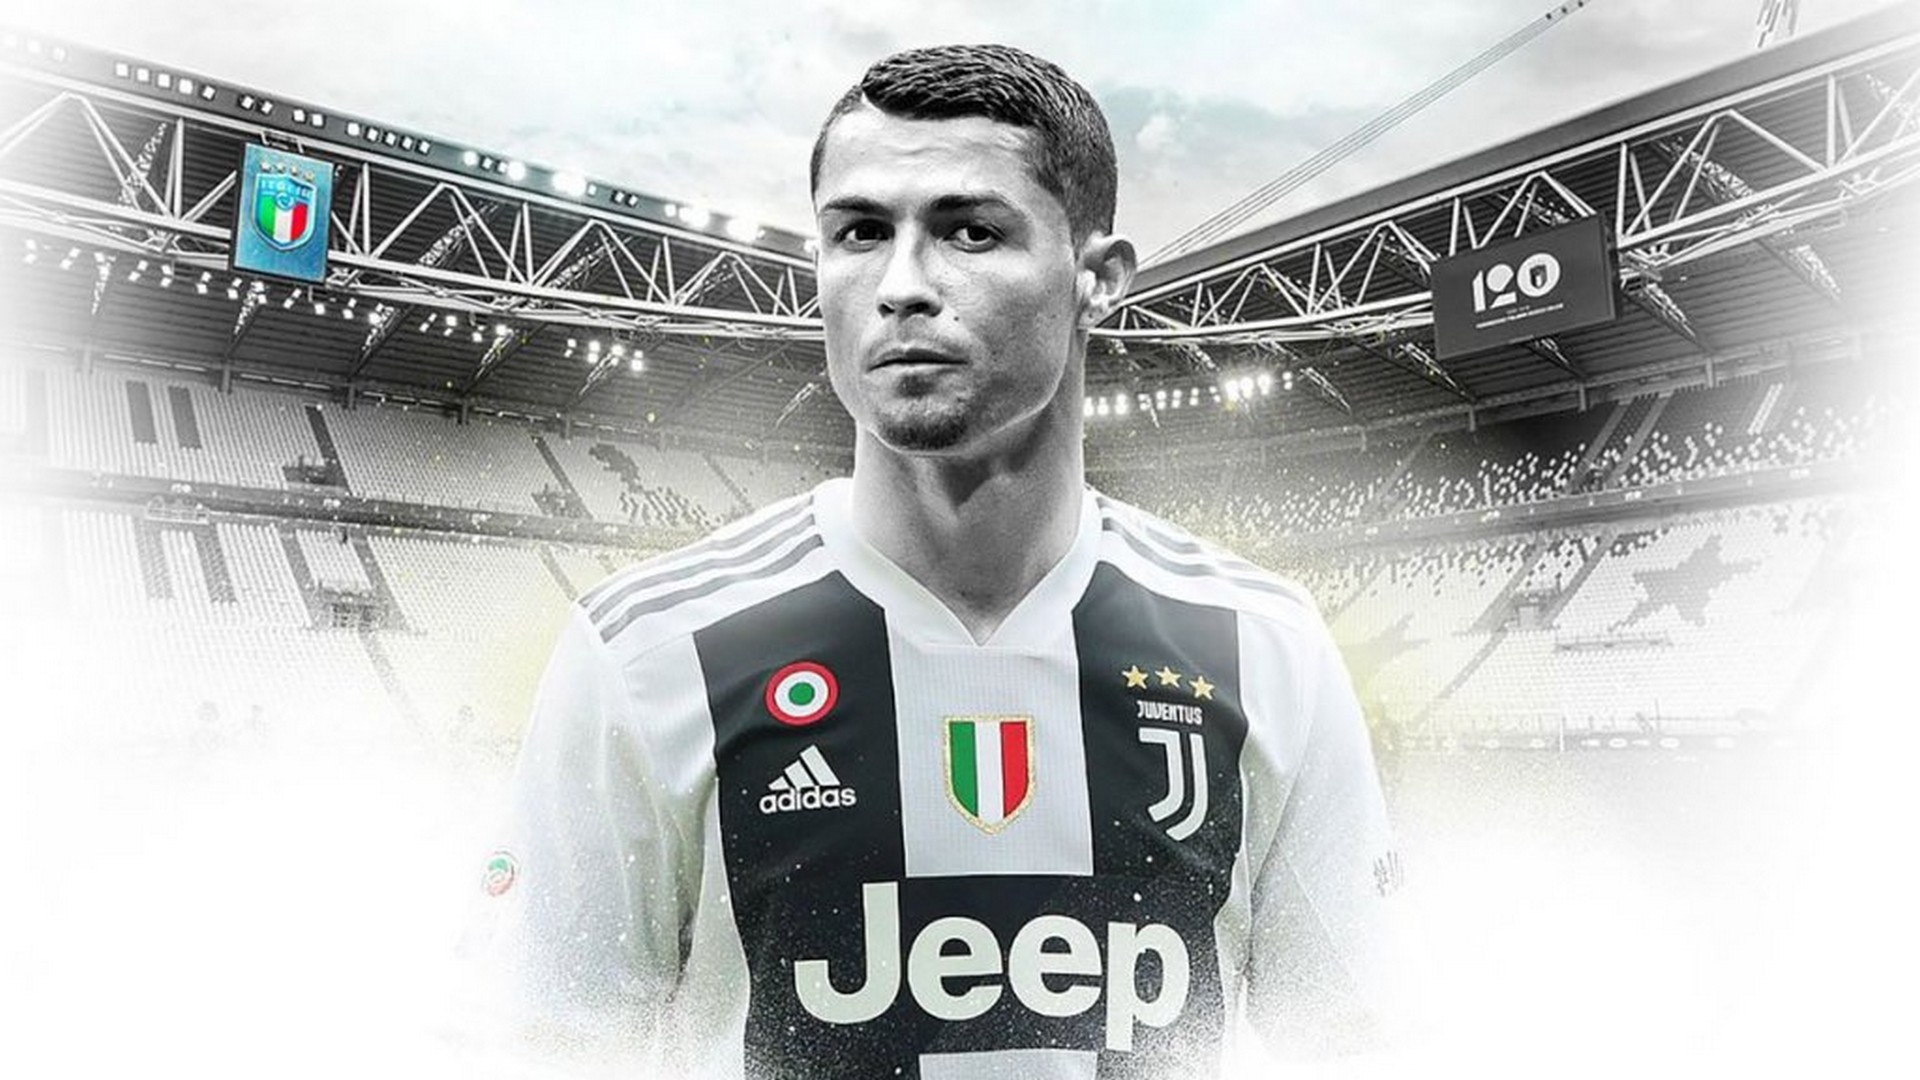 Wallpaper CR7 Juventus Desktop with resolution 1920X1080 pixel. You can use this wallpaper as background for your desktop Computer Screensavers, Android or iPhone smartphones